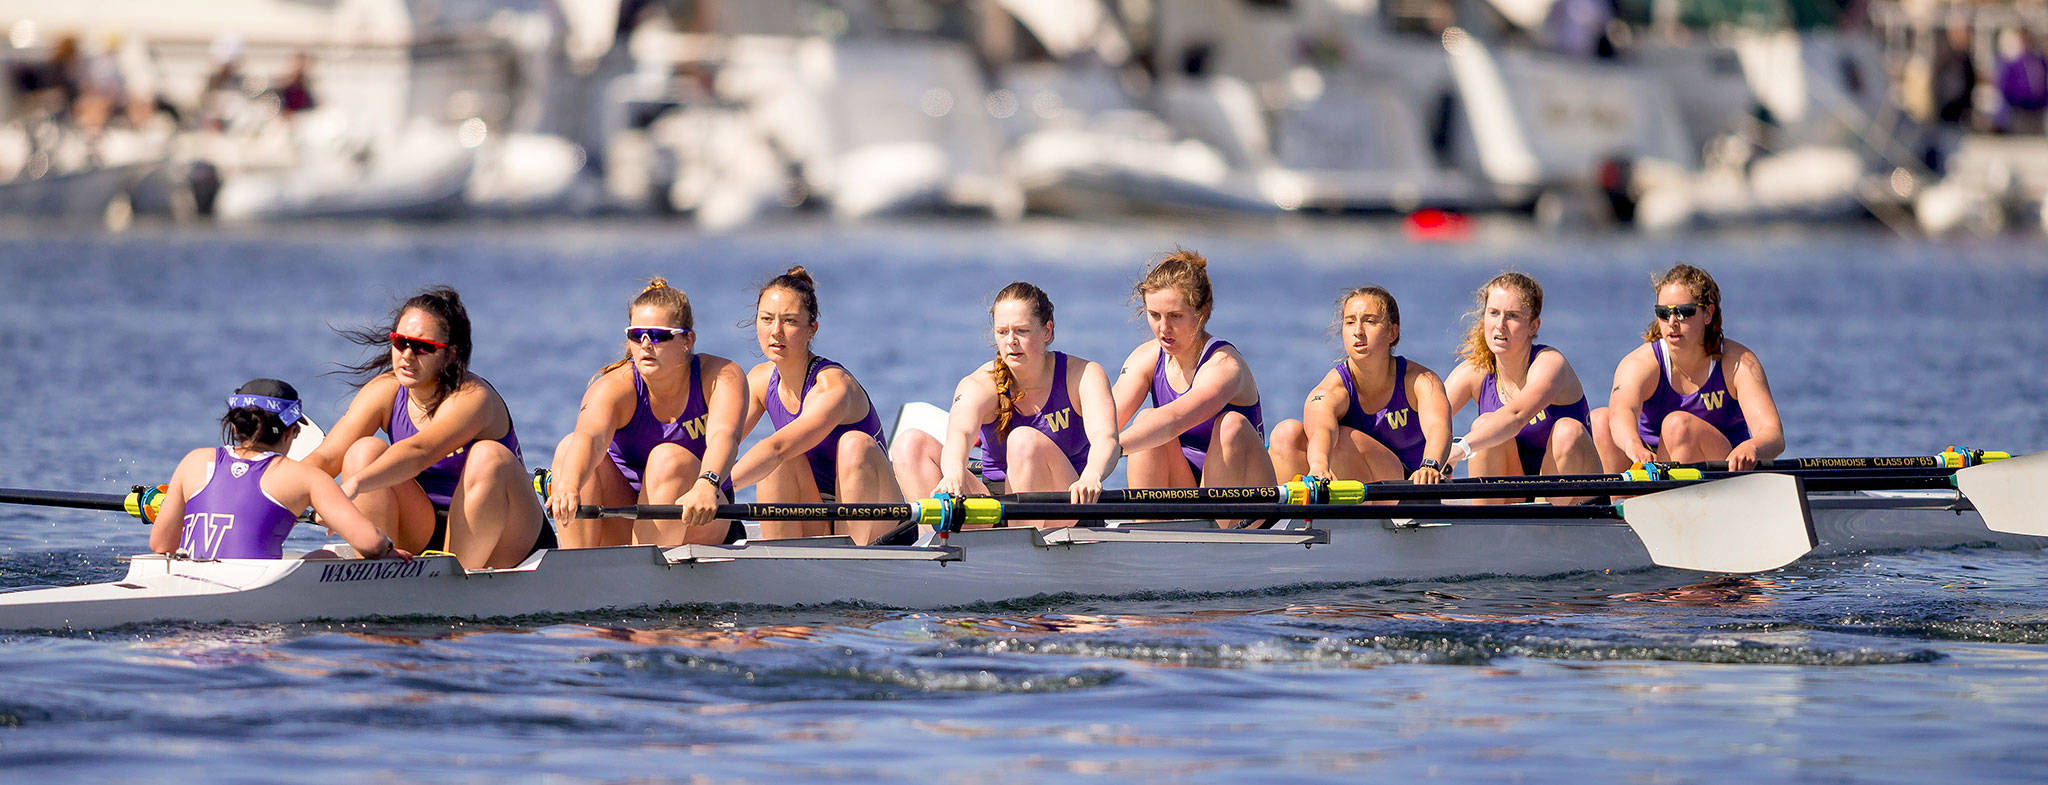 Kinsey Eager, third from left, rows for the University of Washington during the Windermere Cup May 5. (Photo by Scott Eklund/Red Box Pictures)